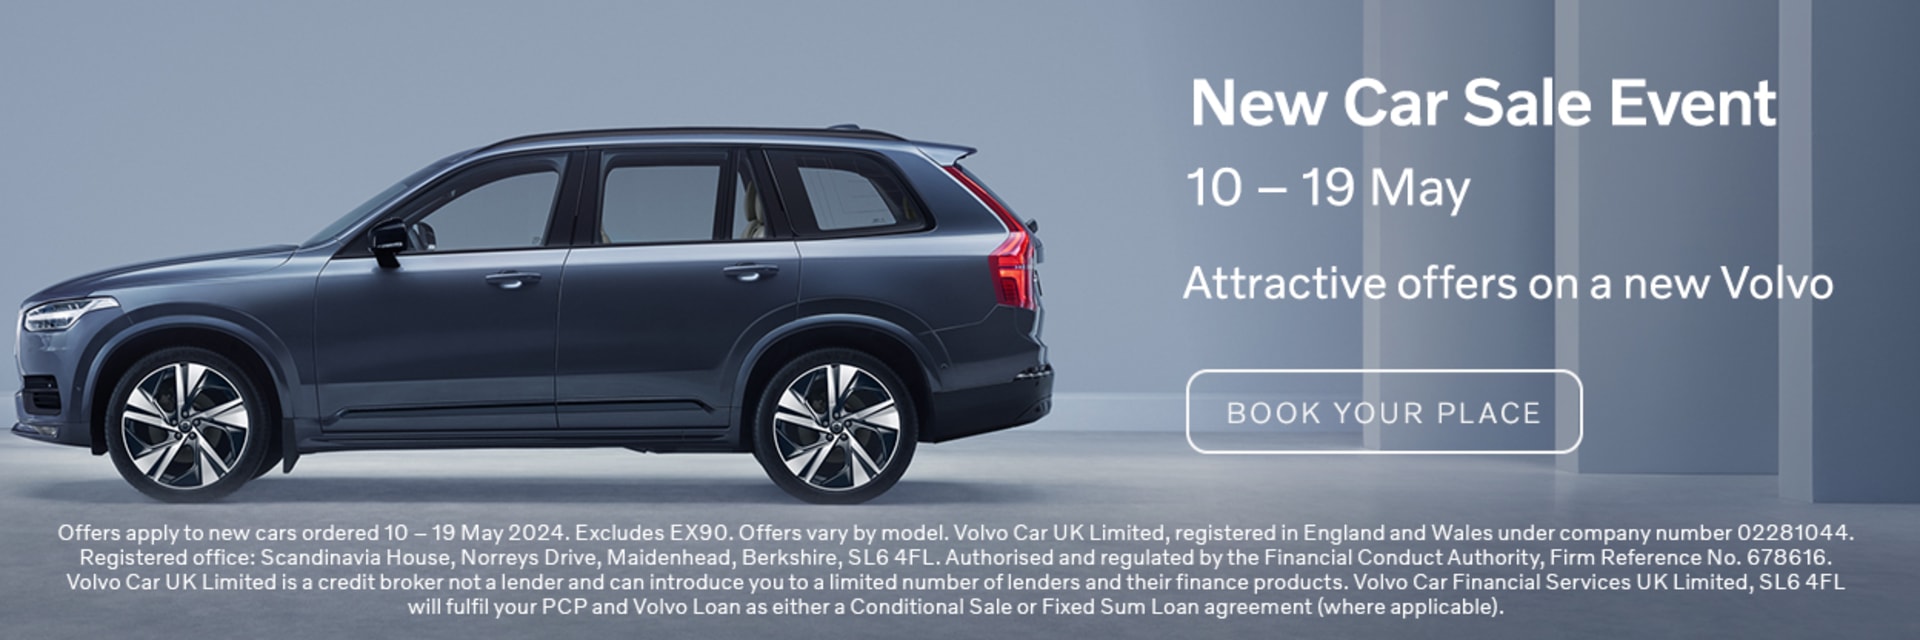 The Volvo New Car Sales Event